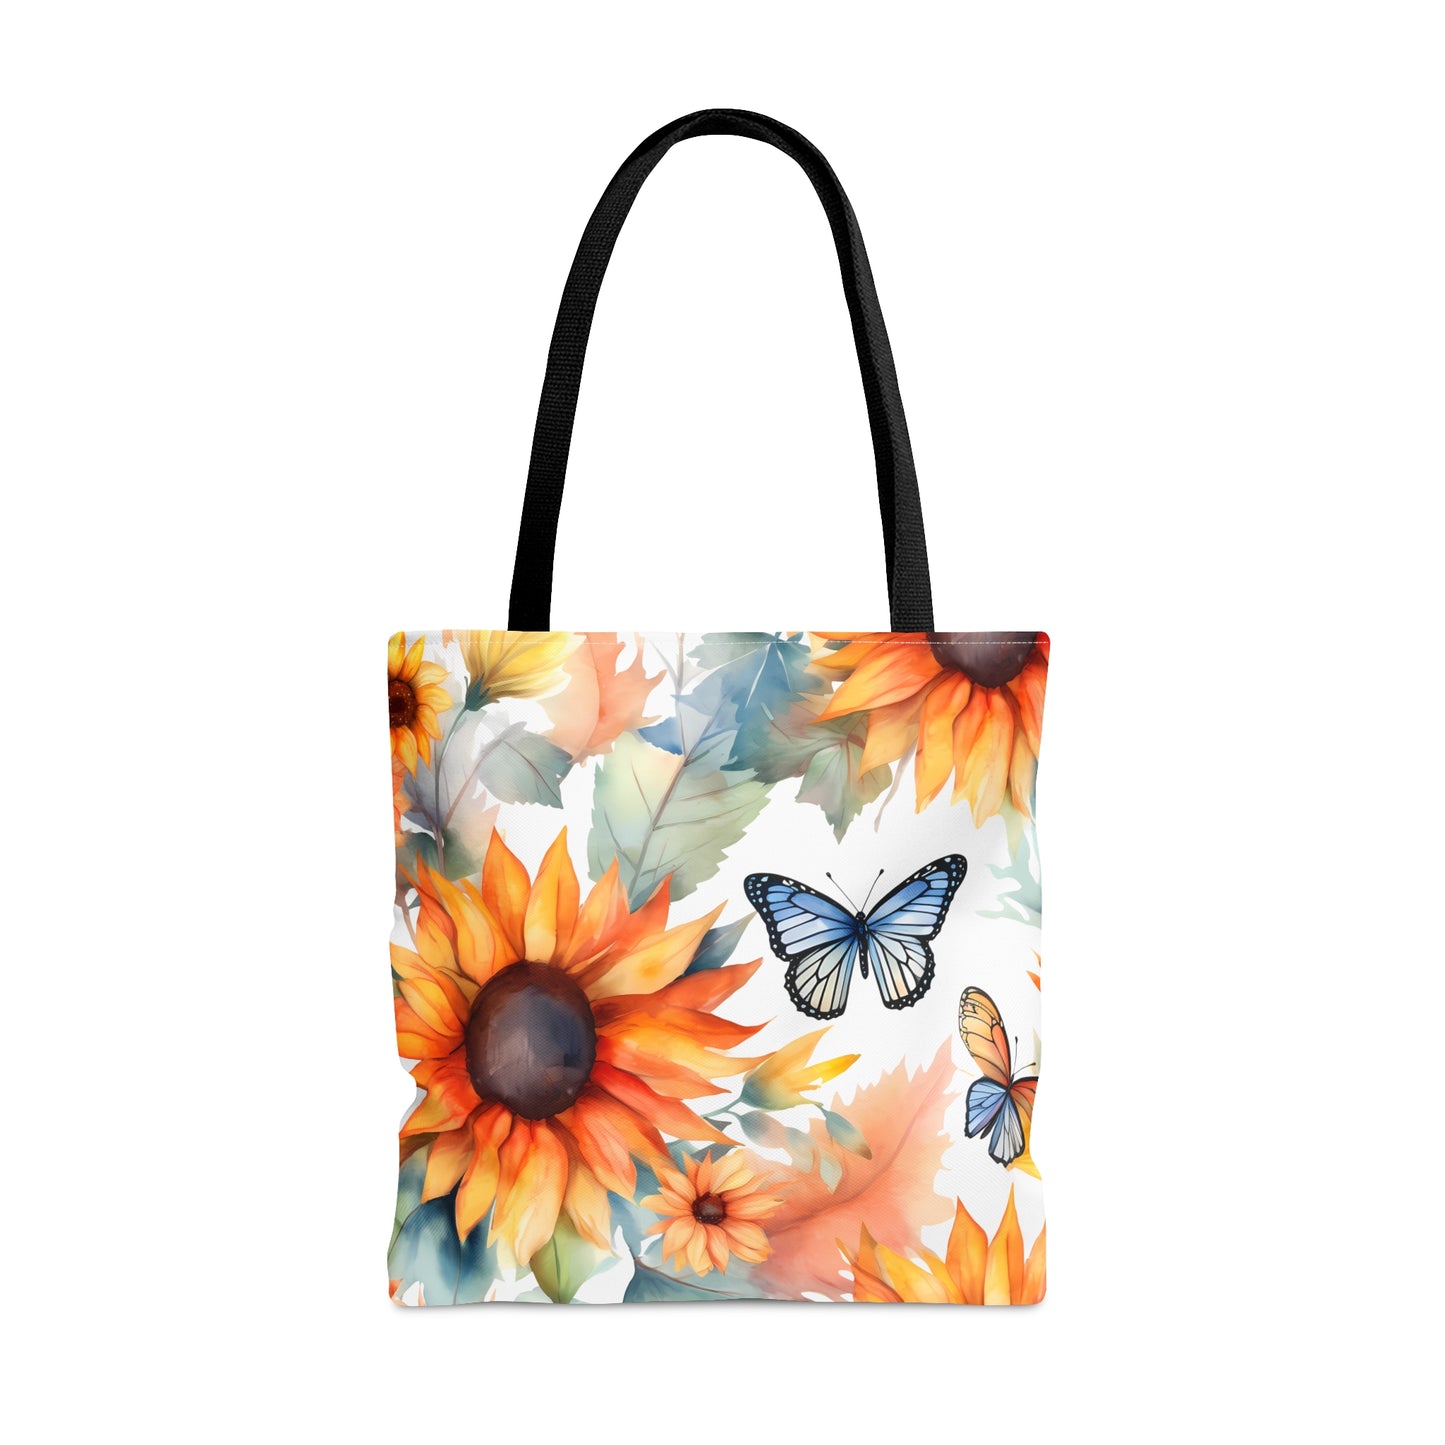 Sunflowers and Butterflies Tote Bag, Book Bag, Grocery Bag, Travel Bag, Gifts For Her, Teacher Gifts, Gifts For Mom, Colorful Tote Bag